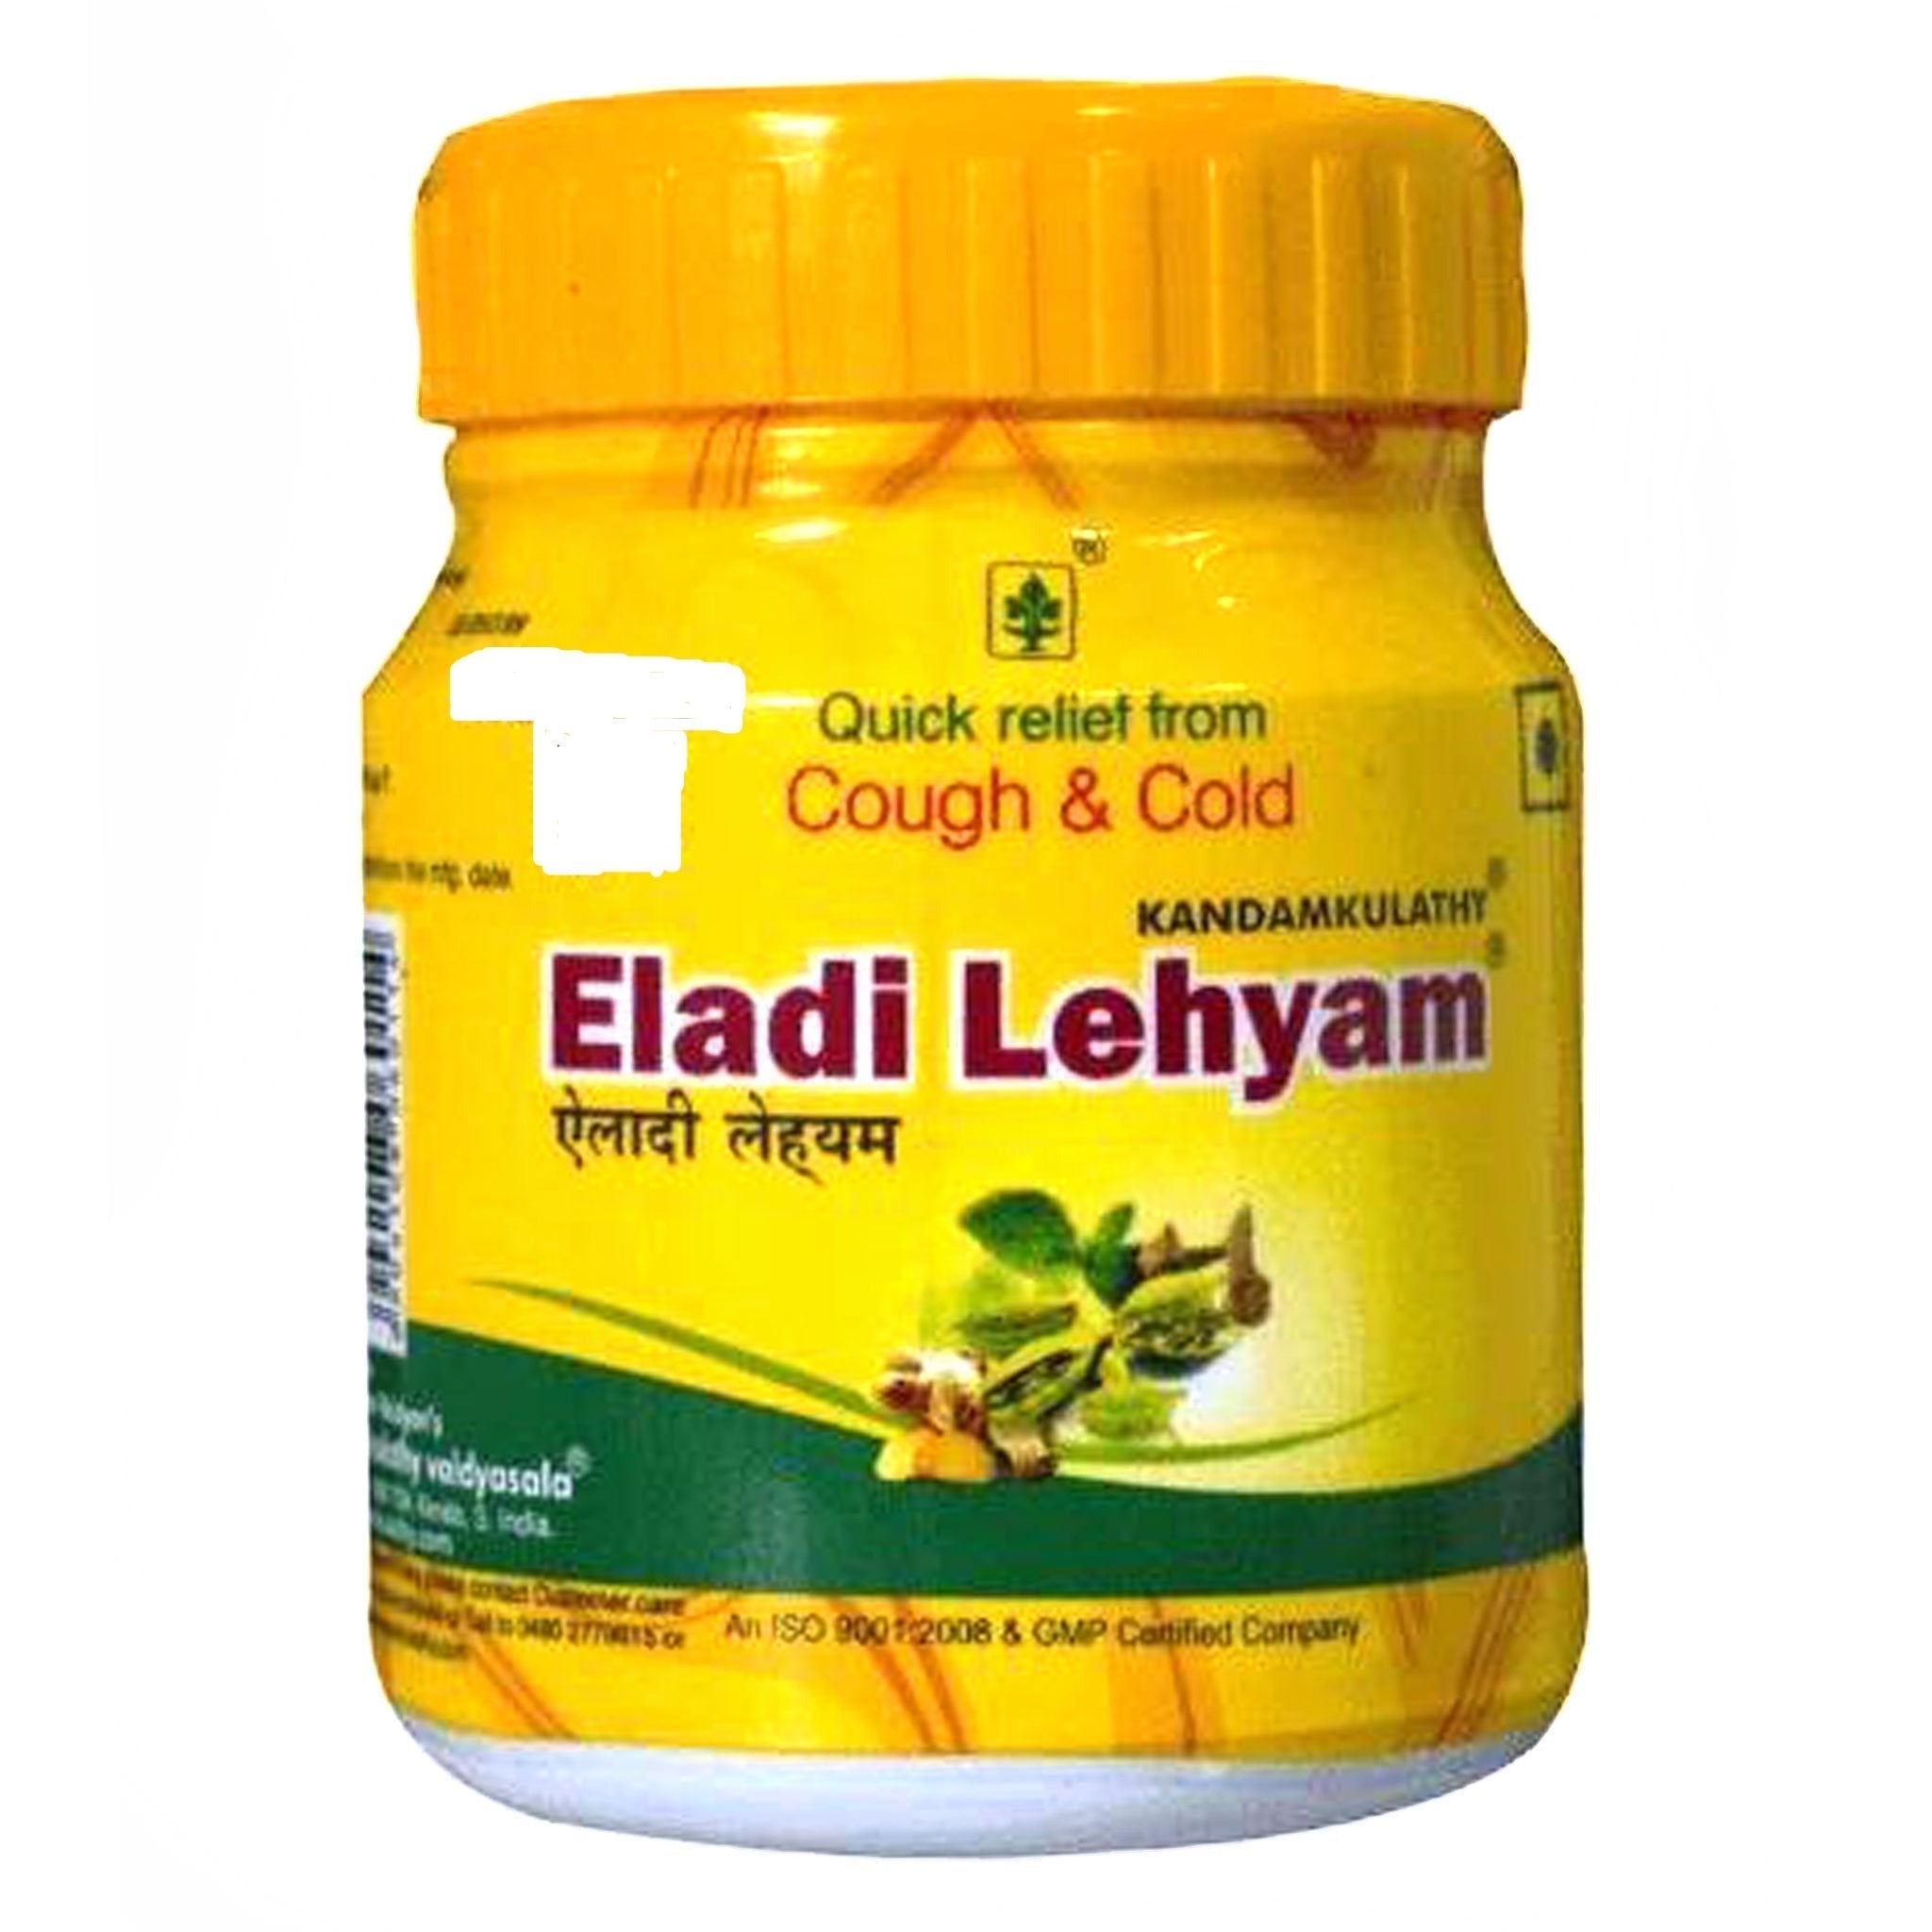 Kandamkulathy Eladi Lehyam 100g Quick Relief from Cough and Cold